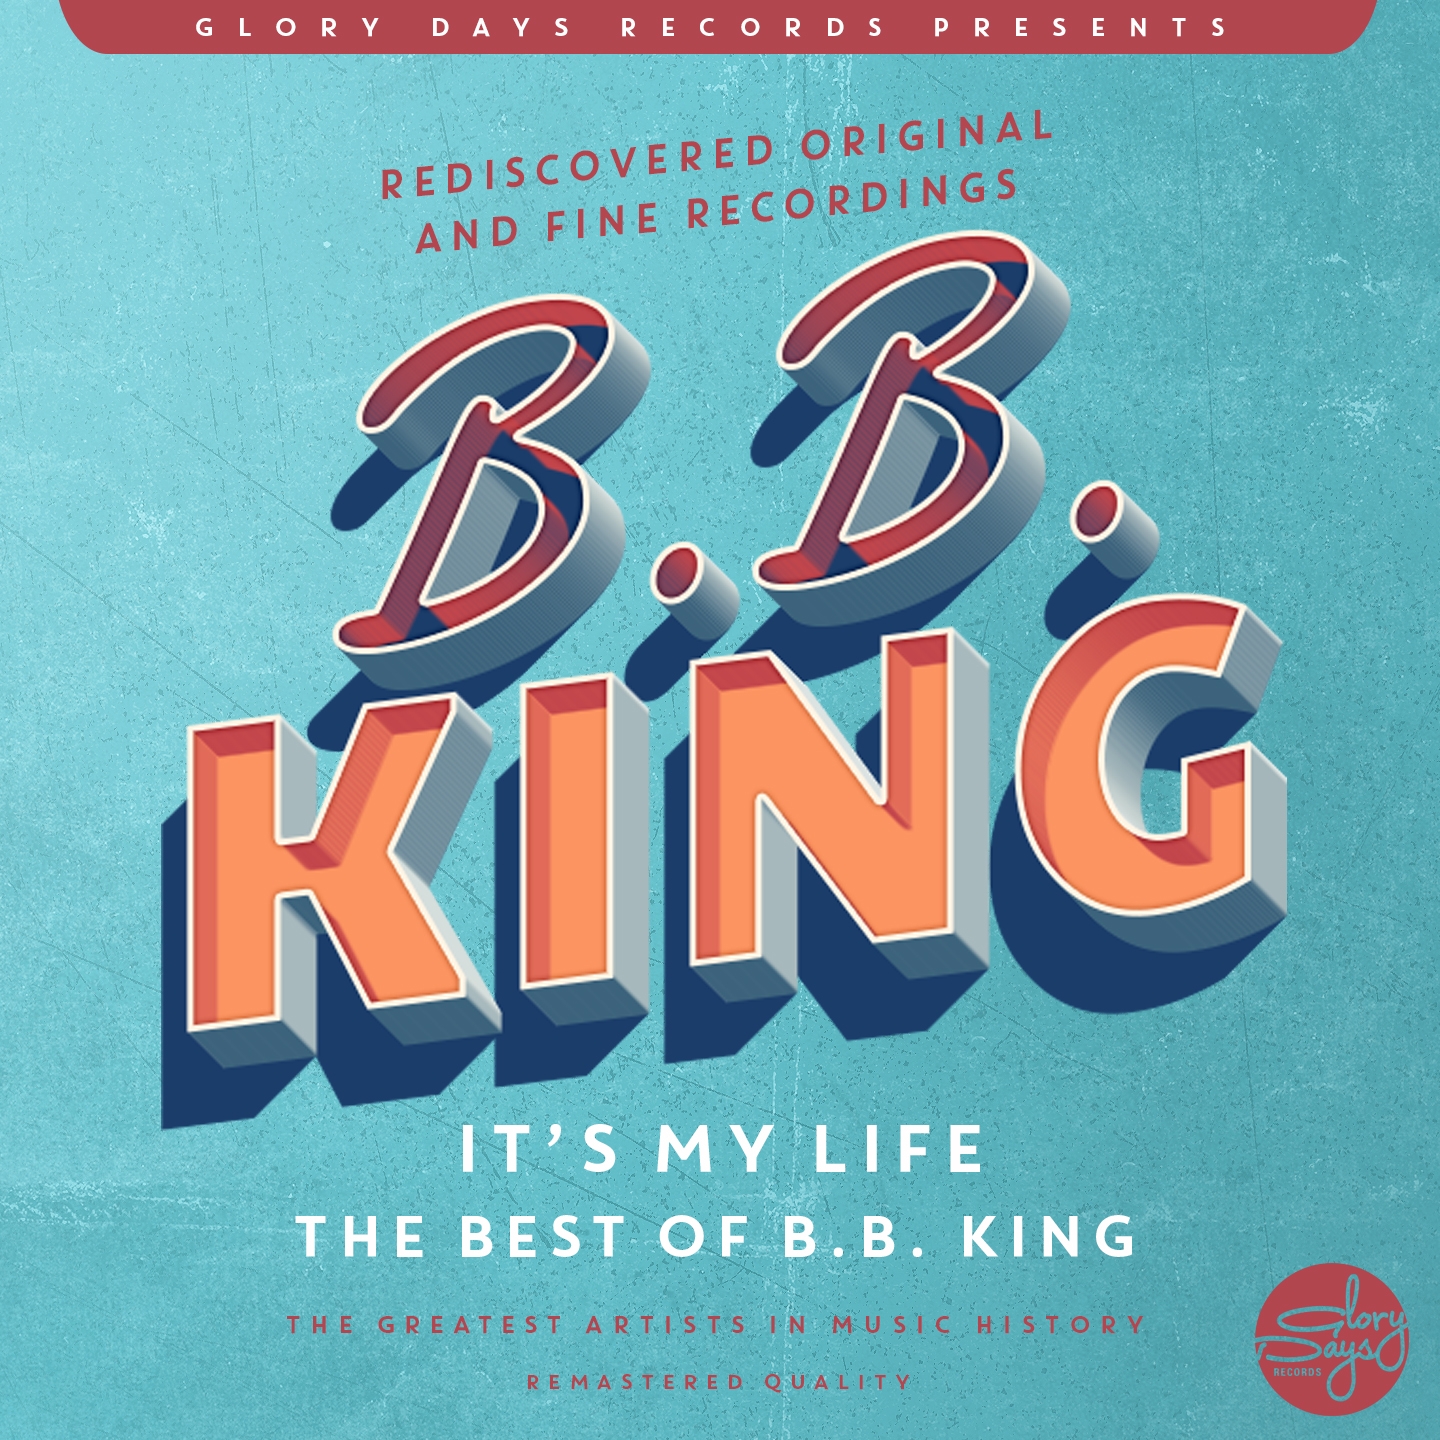 It's My Life (The Best of B.B.King)